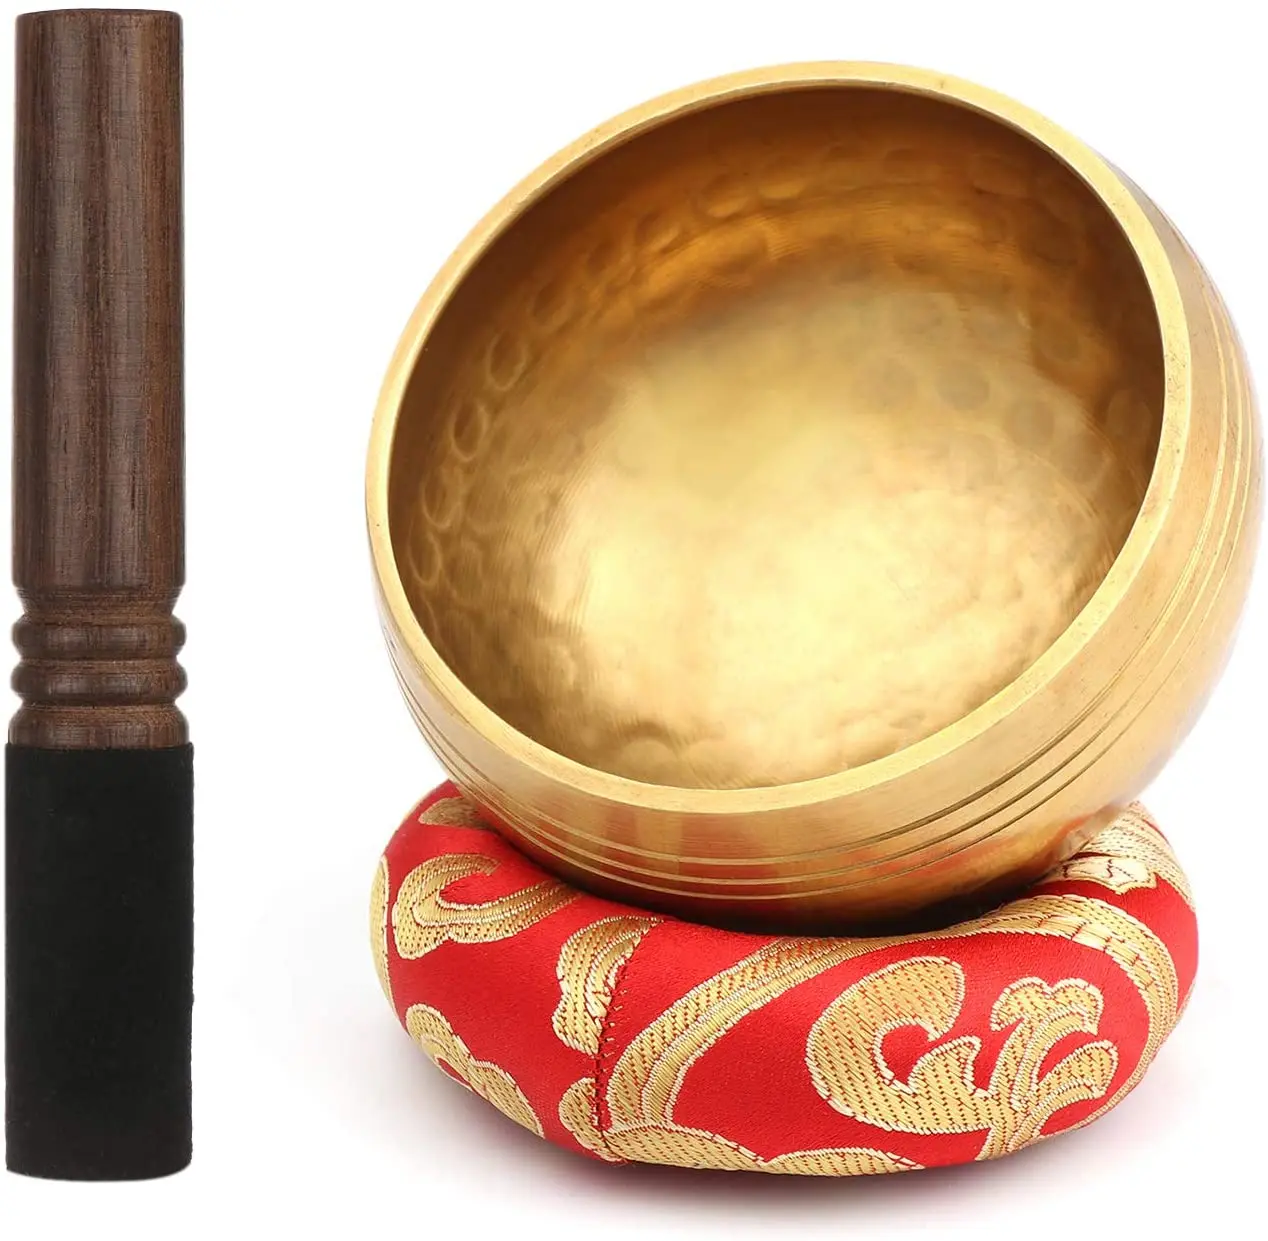 Andos Tibetan Singing Bowl Set Handcrafted in Nepal/Meditation Sound Bowl Set Helpful for Yoga Meditation Prayer Zen Chakra Healing Relaxation Therapy Mindfulness/Yoga Accessories/Bonus Gift Included 